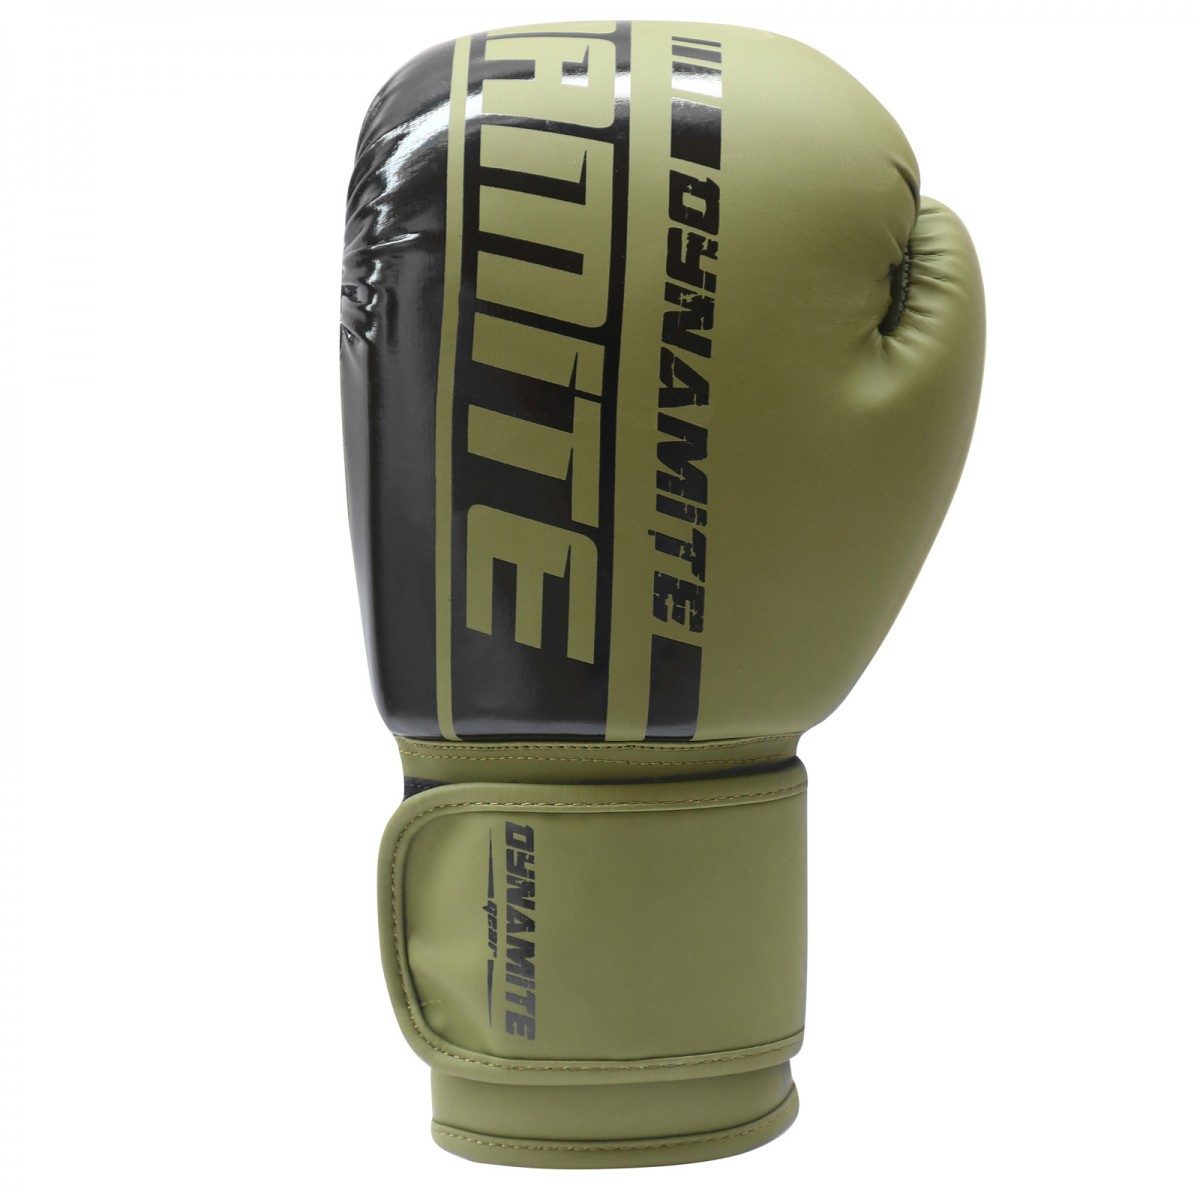 Dynamite Kickboxing Boxing Gloves - Synthetic Leather 6 OZ